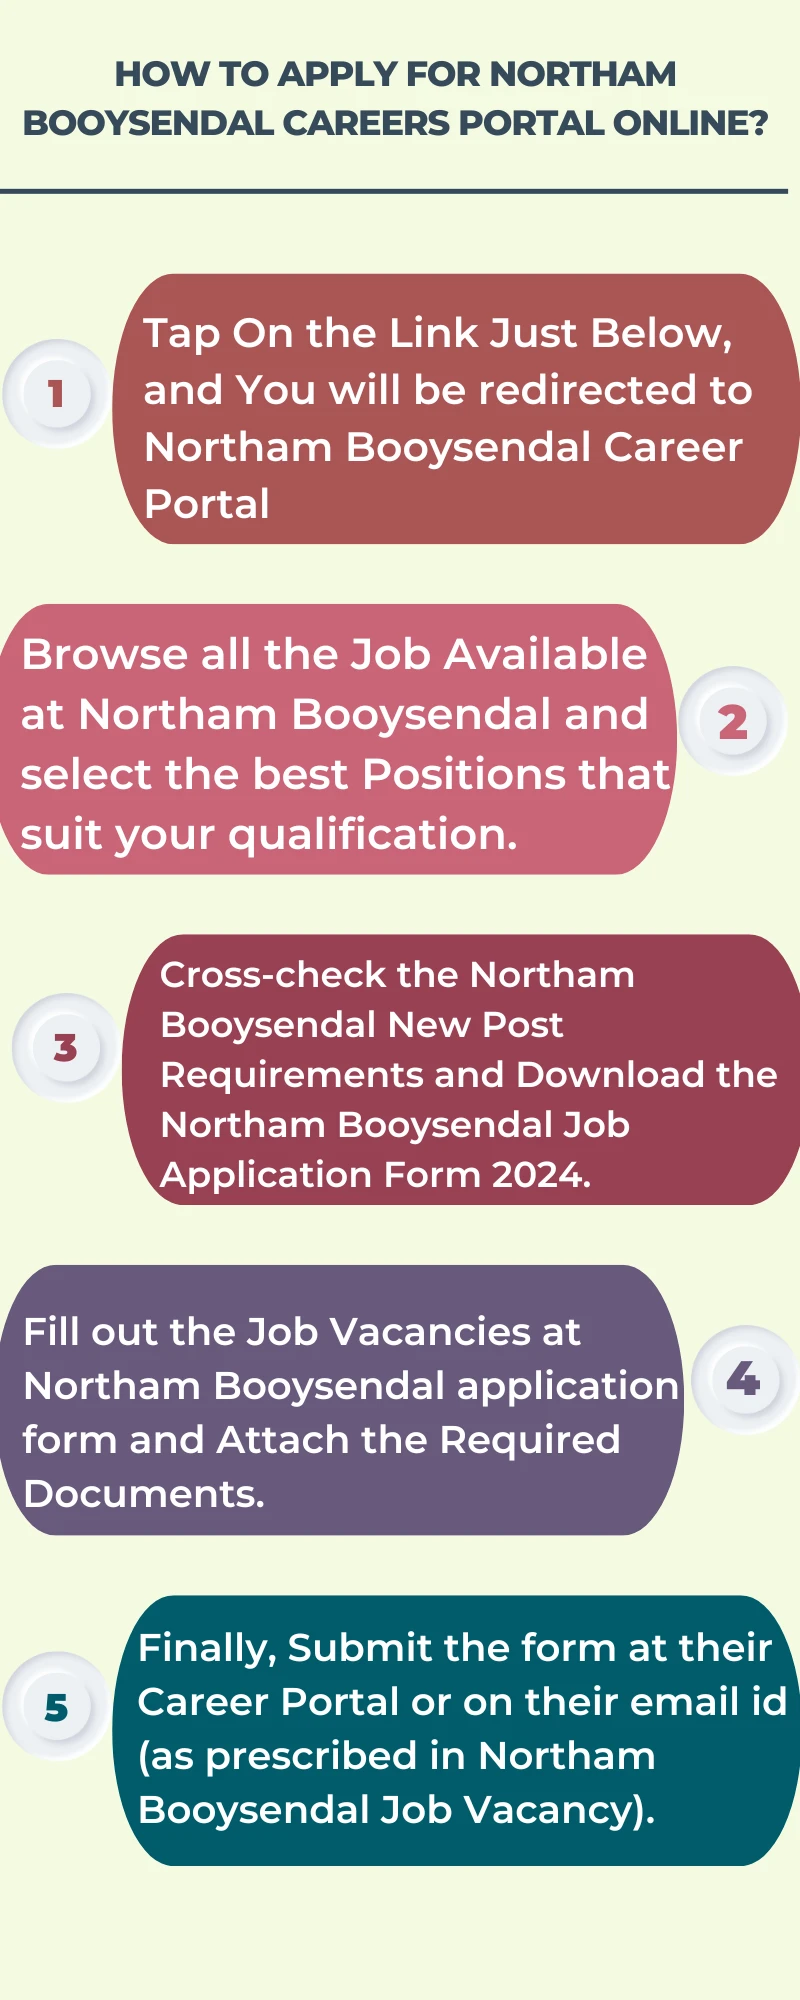 How To Apply for Northam Booysendal Careers Portal Online?